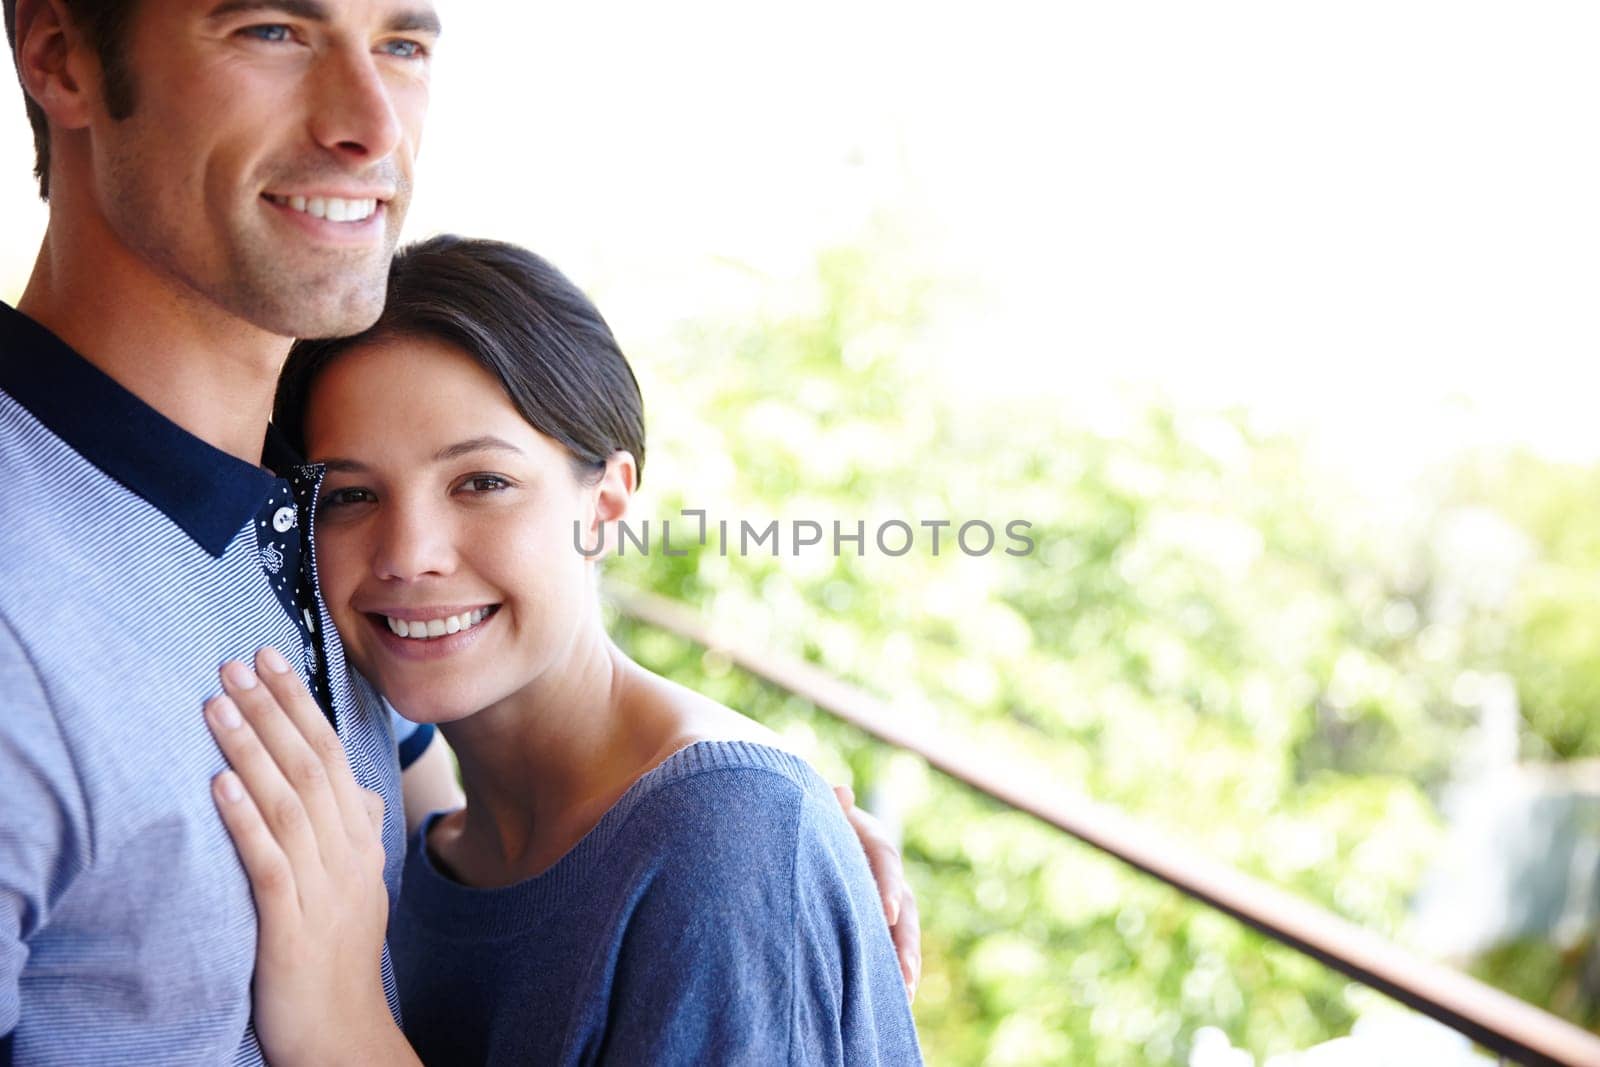 Couple, portrait and happy in hug, support and love for relationship, together and bonding. Woman, man and hugging with smile, romance and closeness in outdoors, holding and embracing for memories.